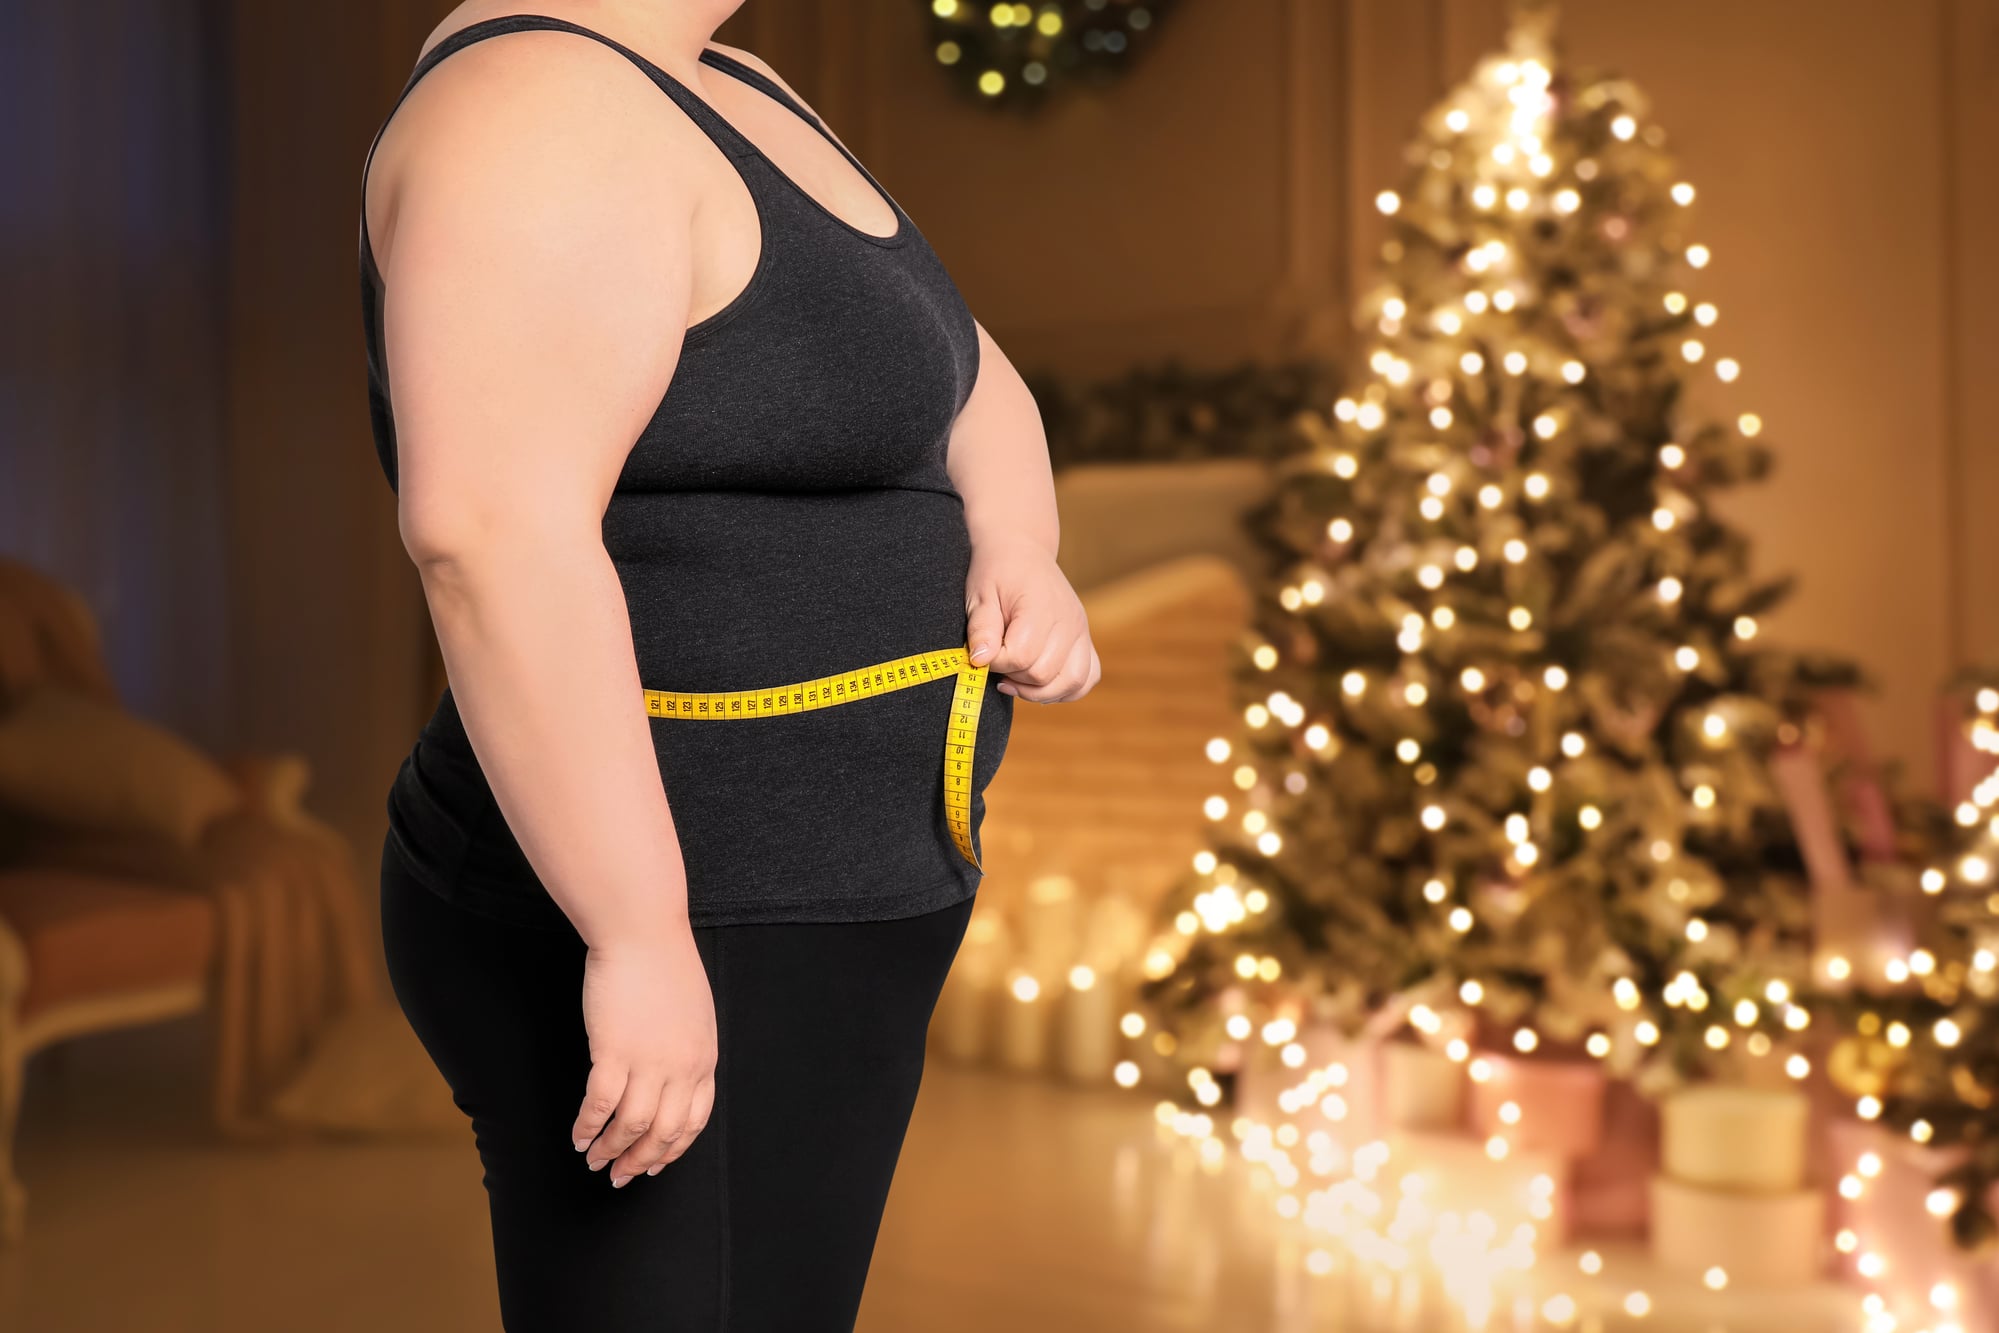 Tips to Avoid Holiday Weight Gain for Older Adults